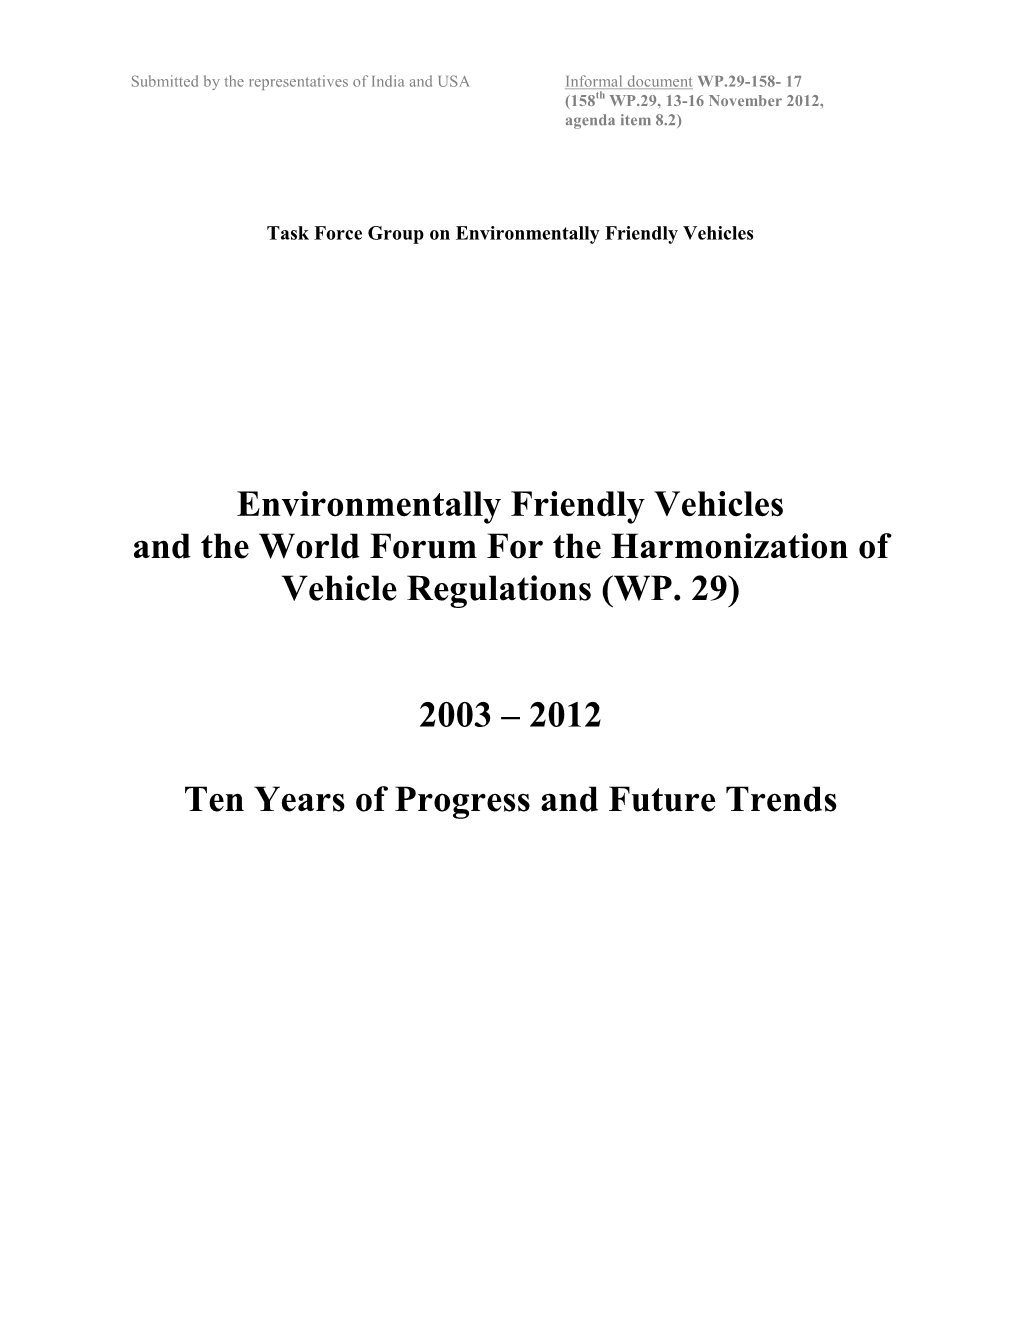 Environmentally Friendly Vehicles and the World Forum for the Harmonization of Vehicle Regulations (WP. 29) 2003 – 2012 Ten Y